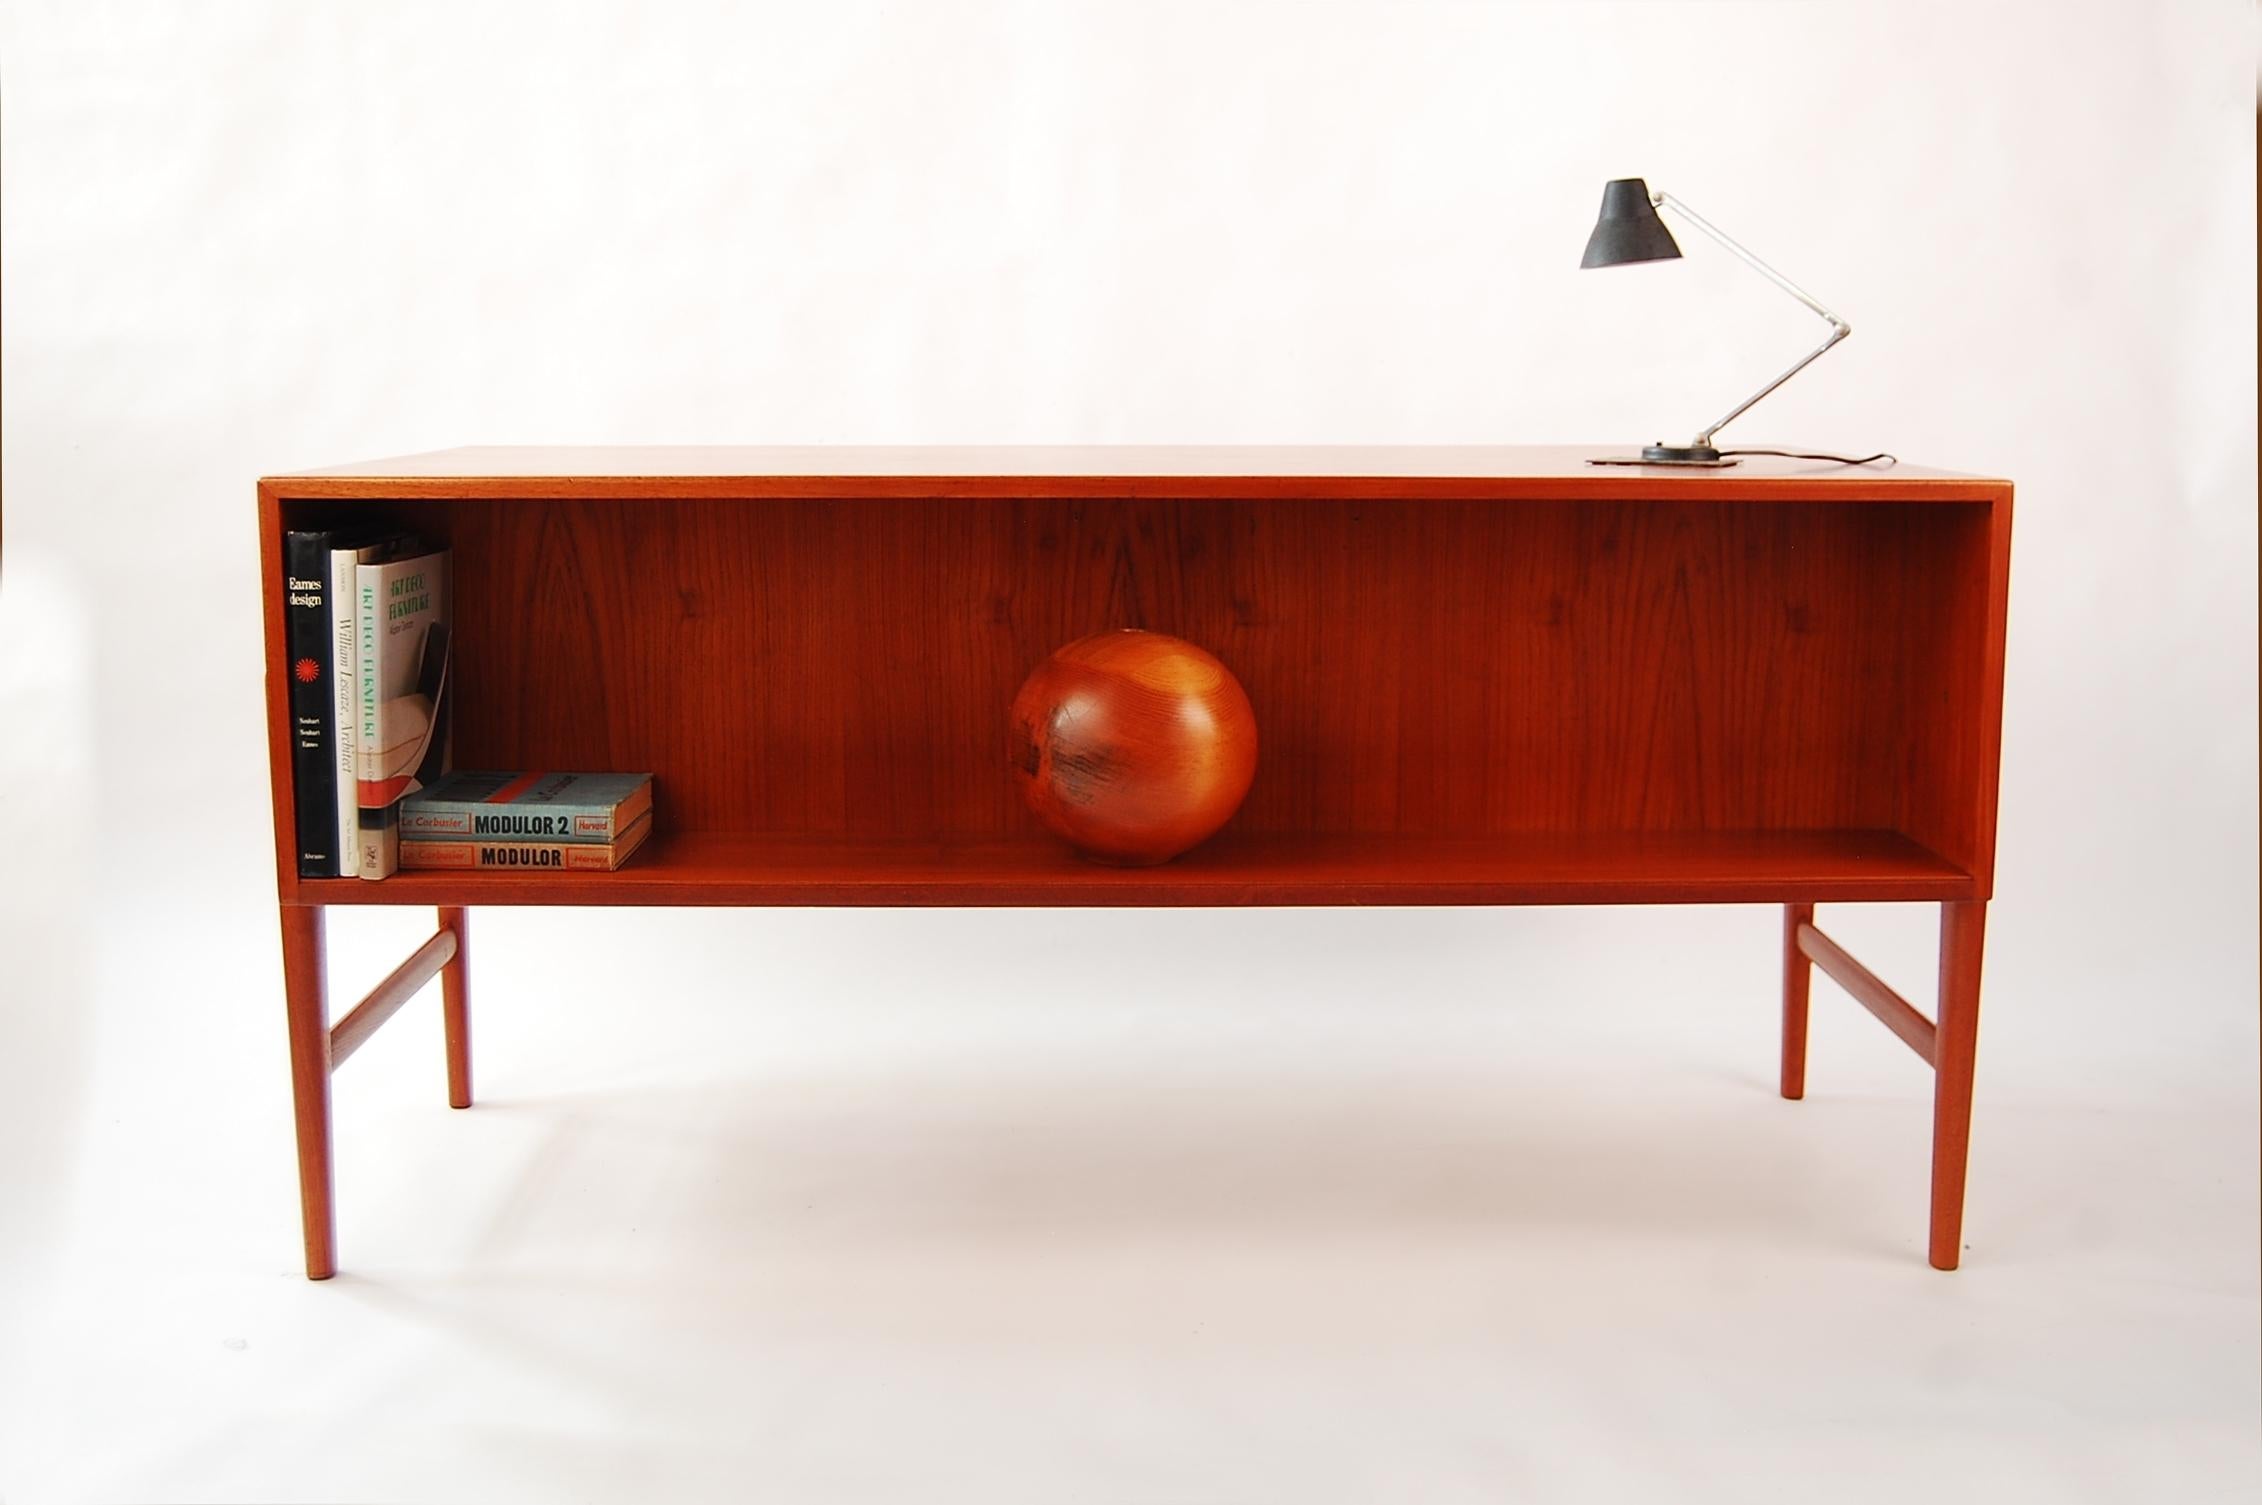 Danish desk in teak and brass, with storage front, attributed to Arne Vodder, circa 1967. Great scale, dovetailed drawers. A very well designed and built desk.